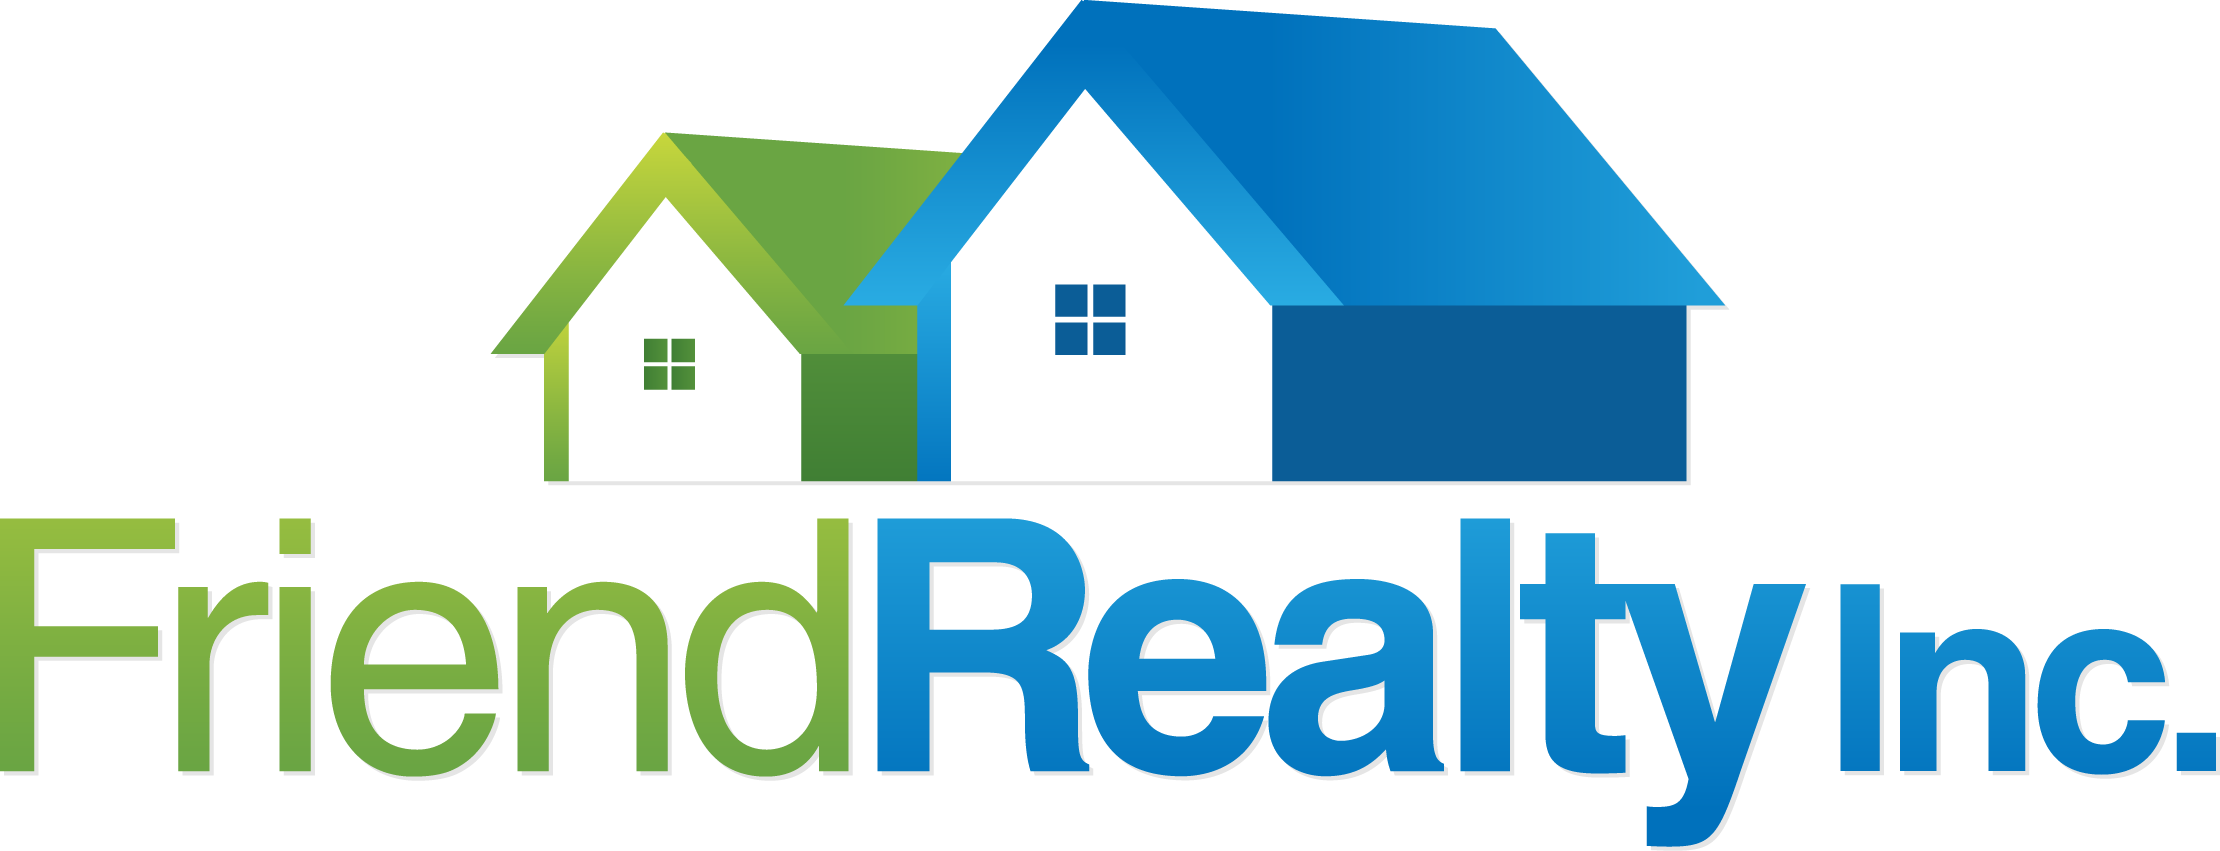 Friend Realty Inc - Real Estate (2220x851), Png Download